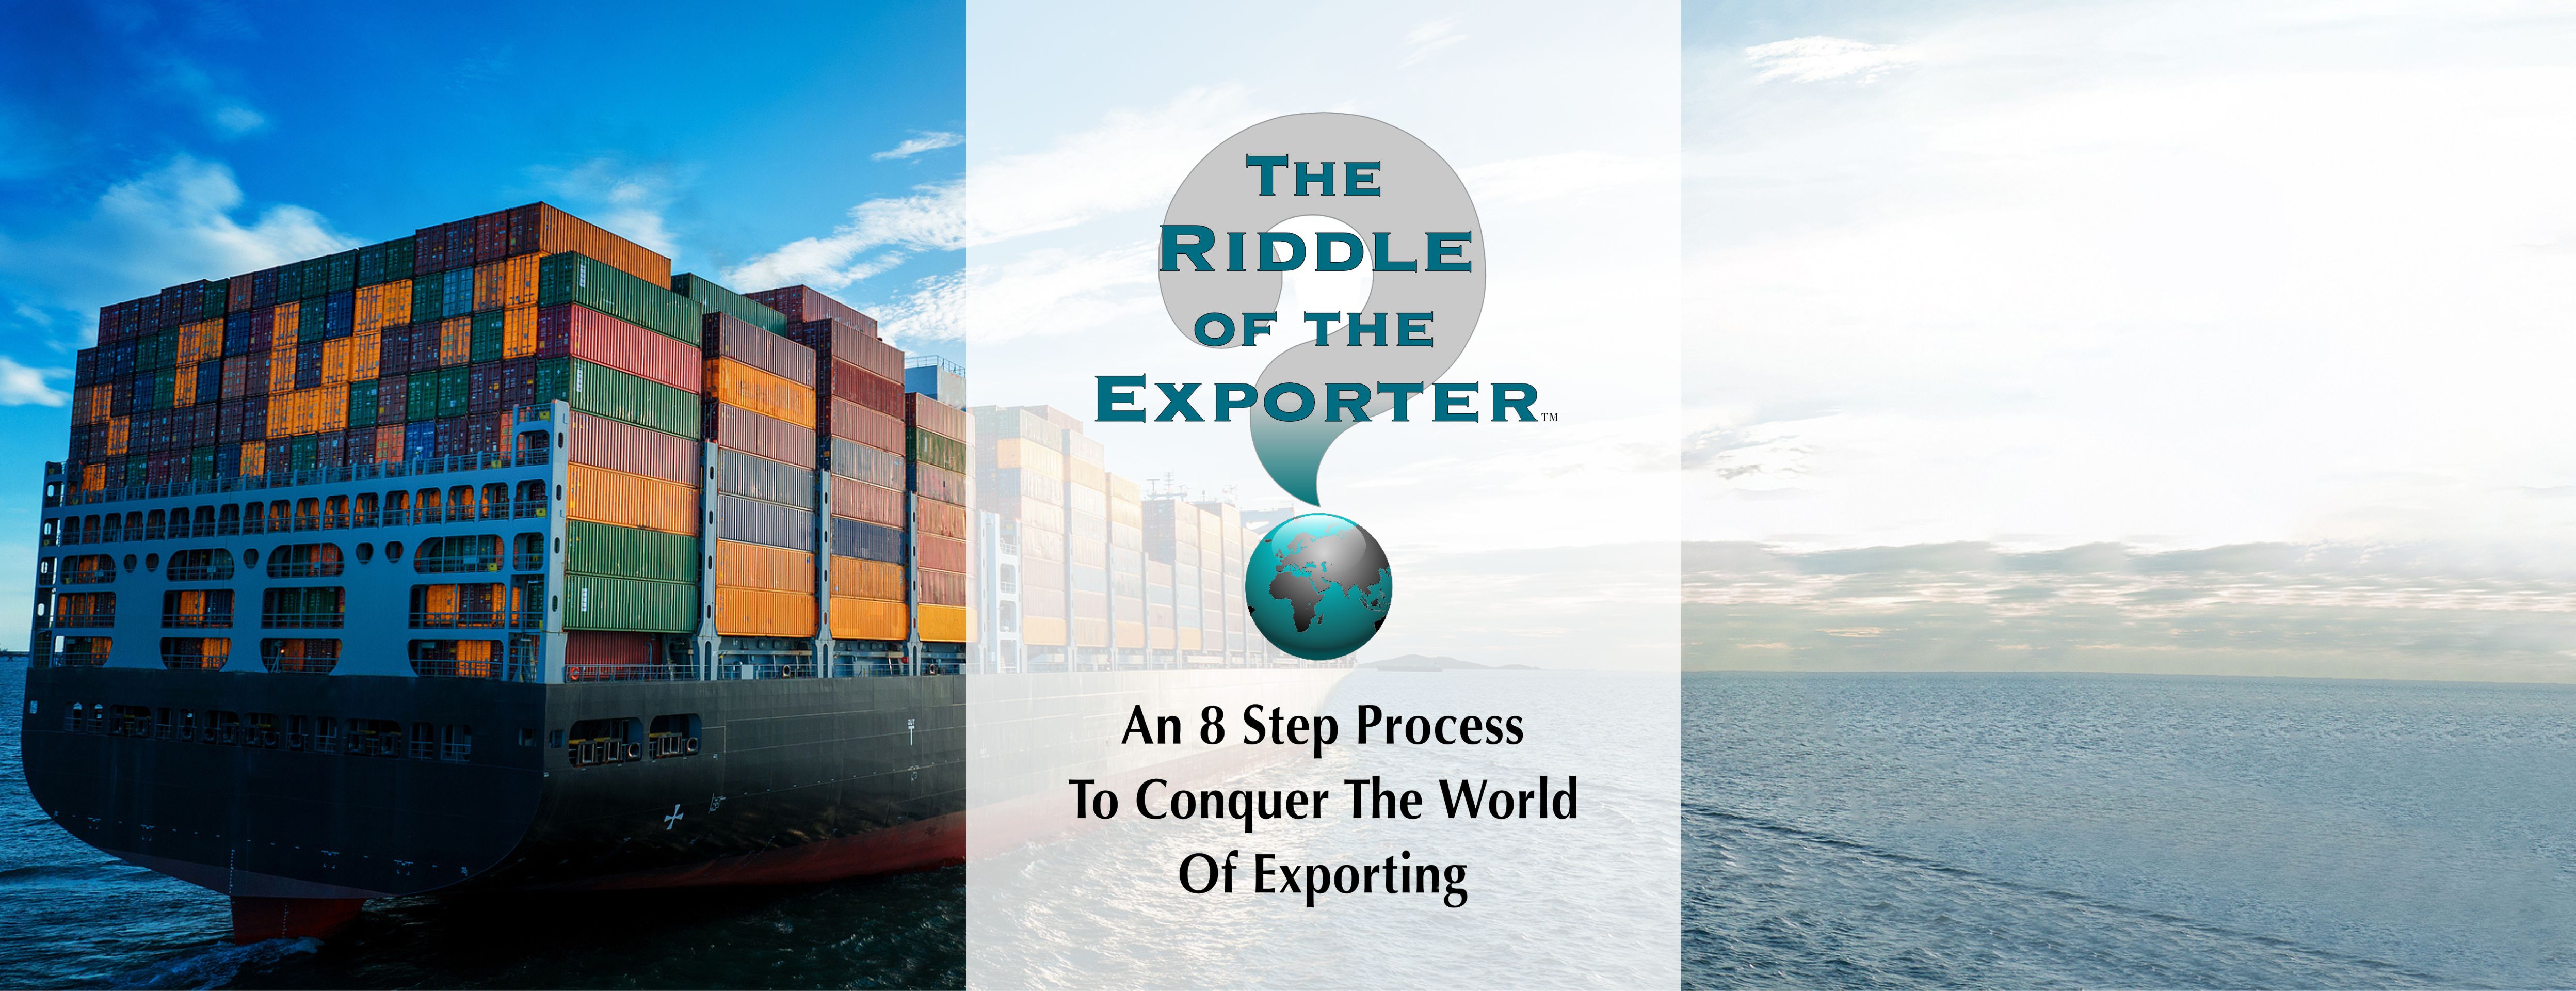 Introduction to The Riddle of the Exporter